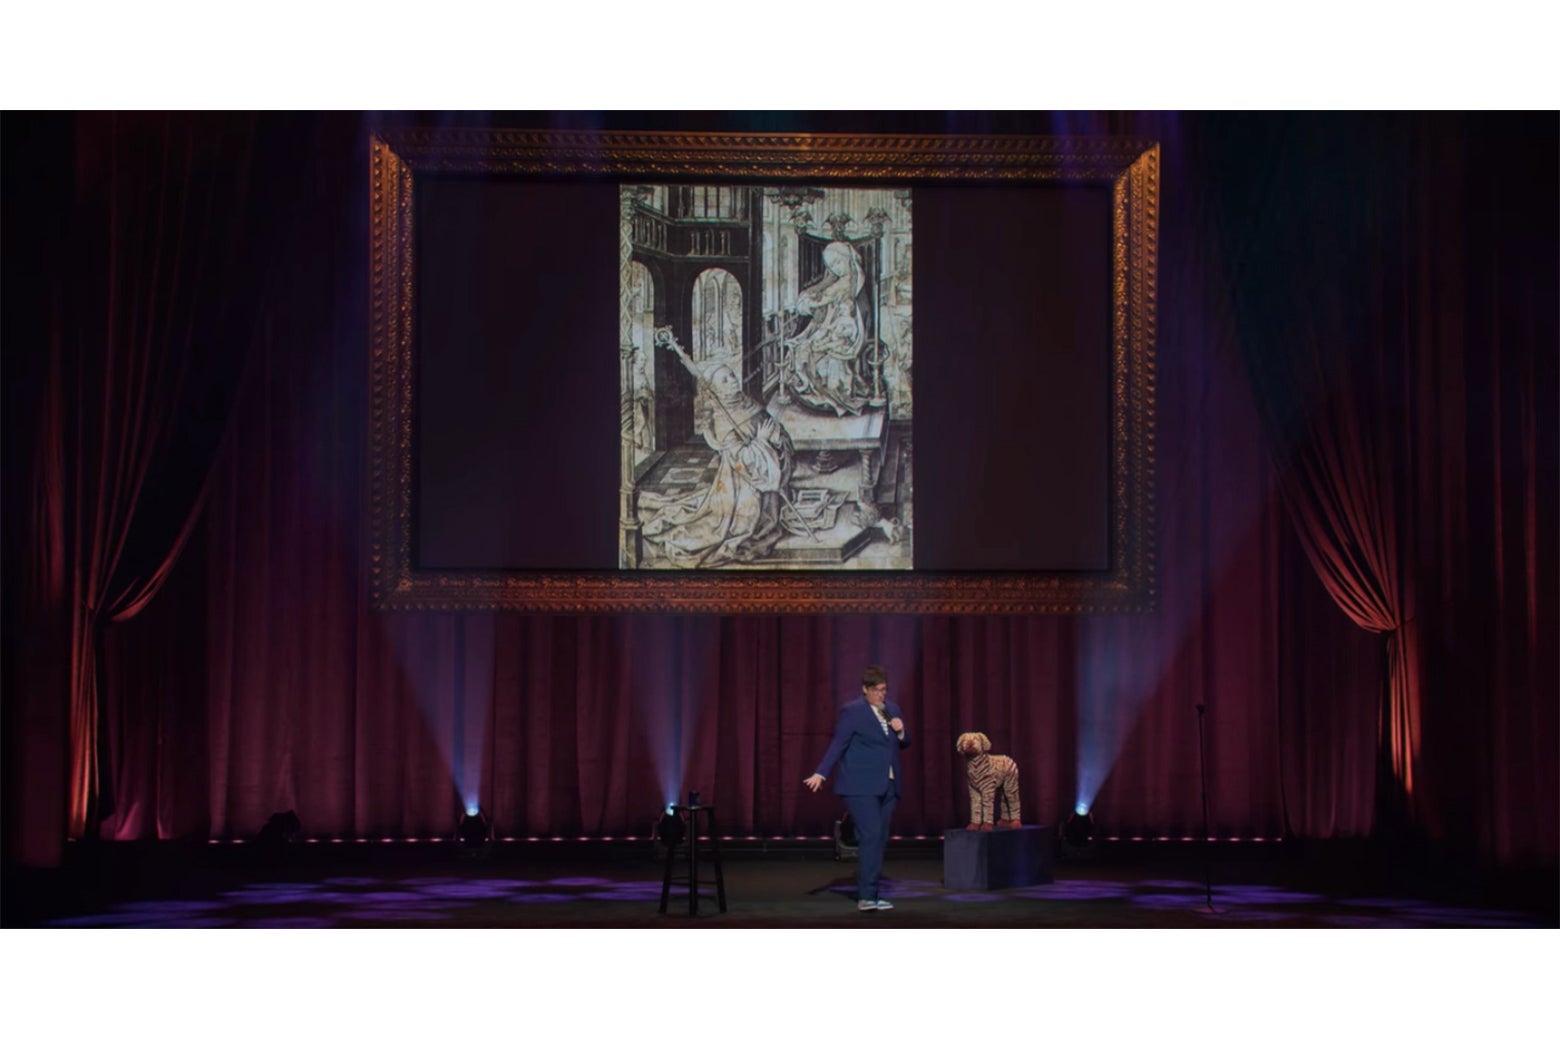 Hannah Gadsby stands onstage in front of a projection of an engraving of St. Bernard kneeling while Mary lactates into his mouth.